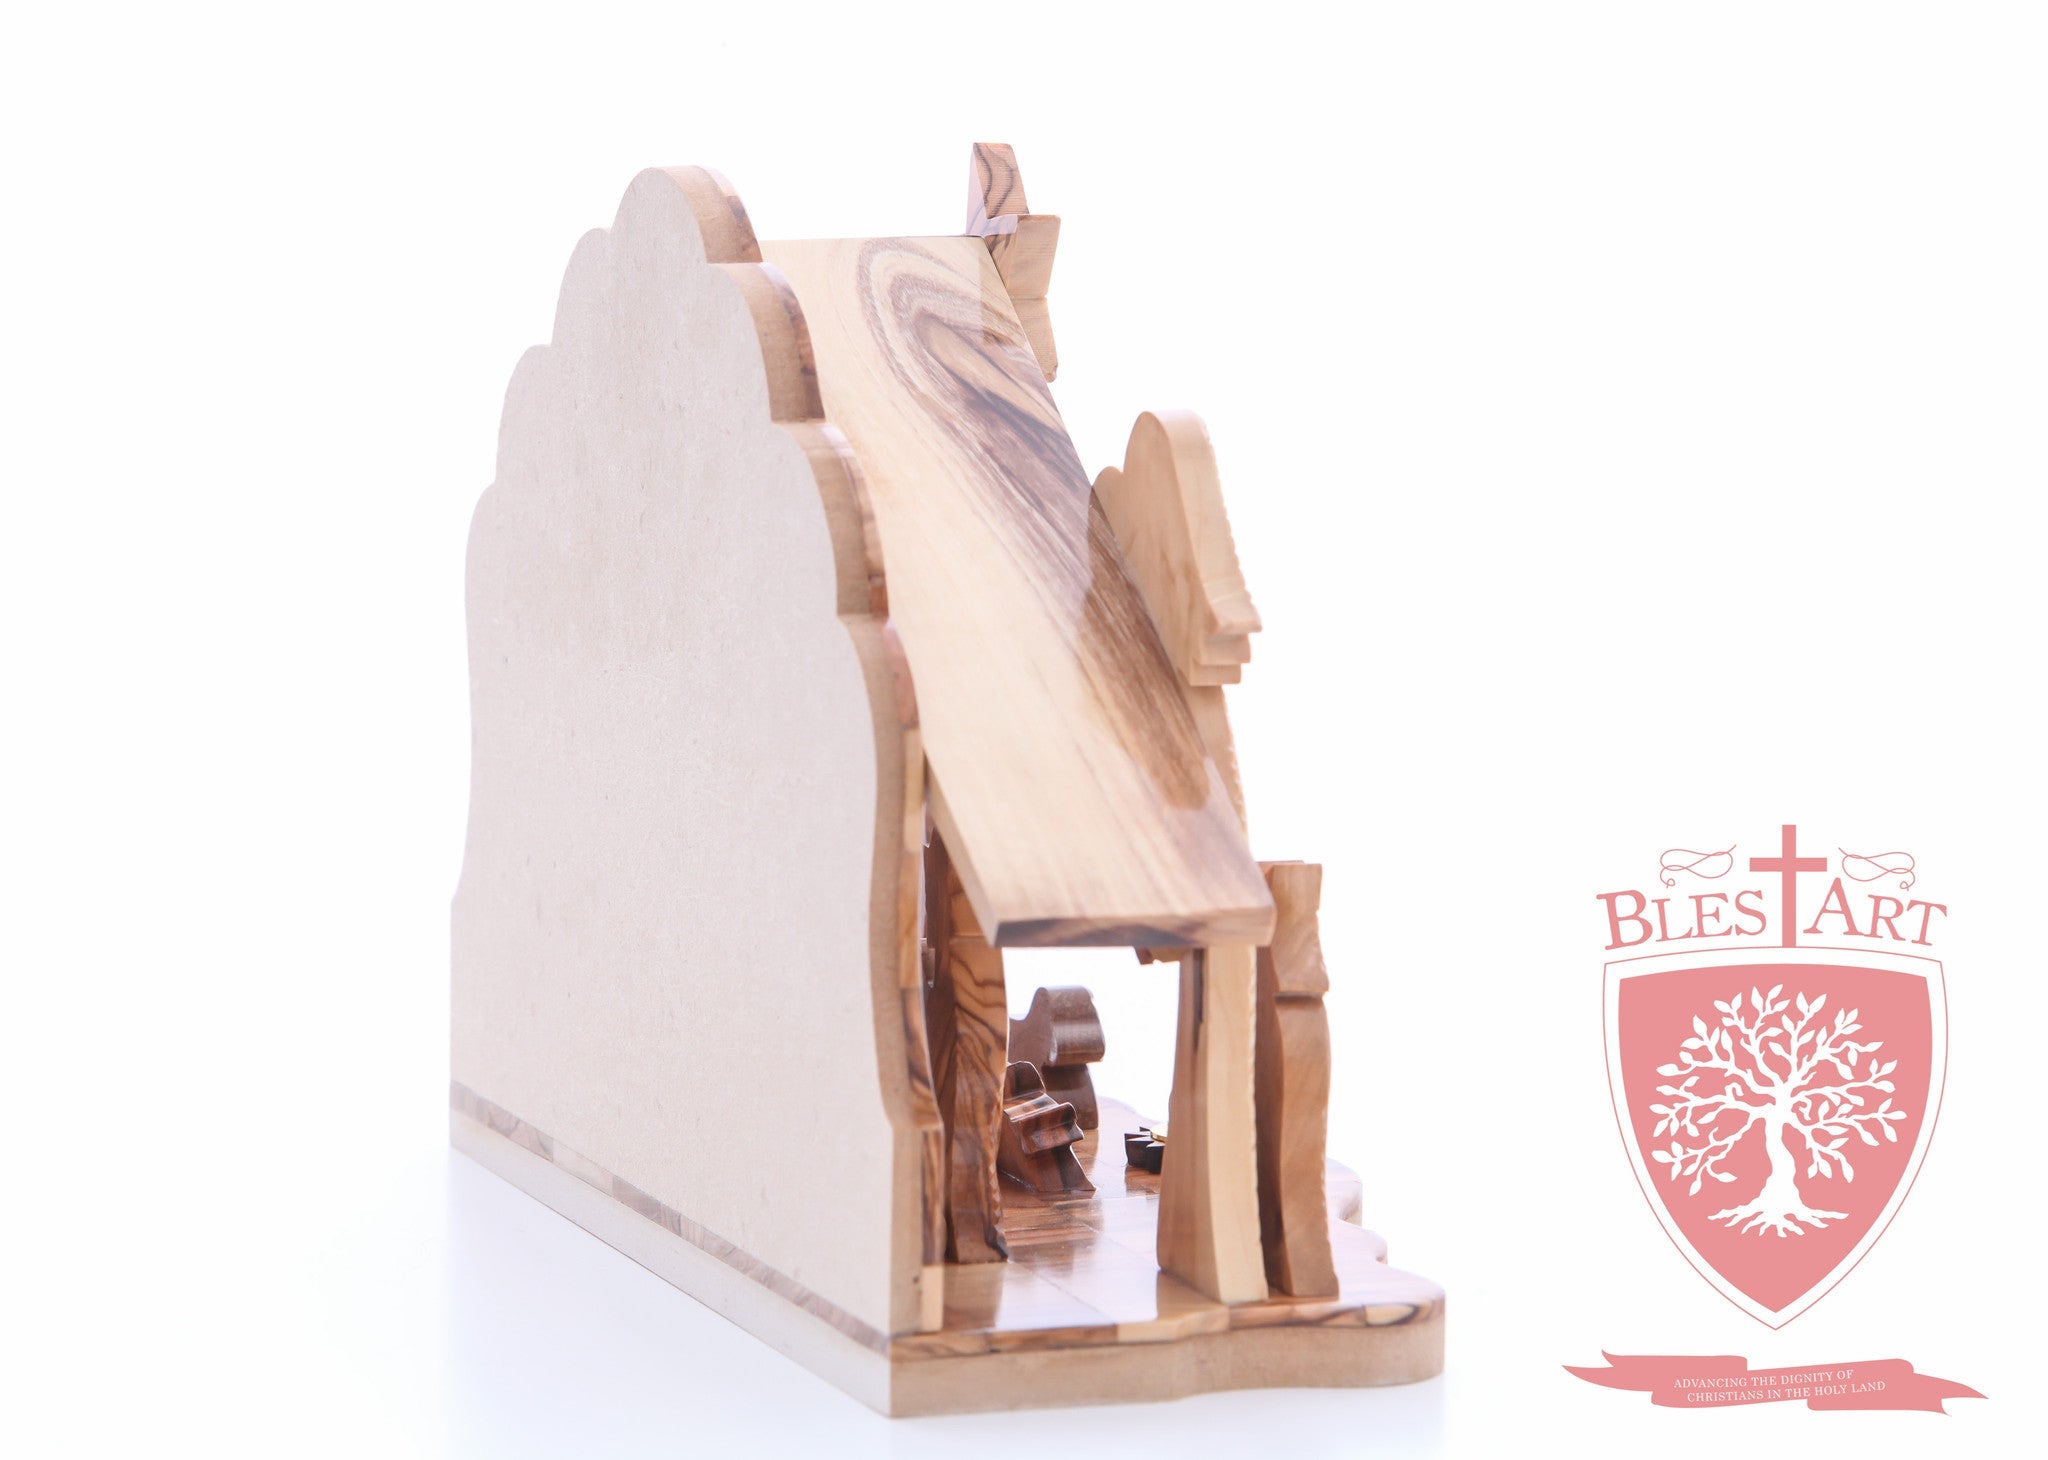 Nativity Set, with 2-d figures and Incense from the tomb of jesus Size: 9" / 25 CM